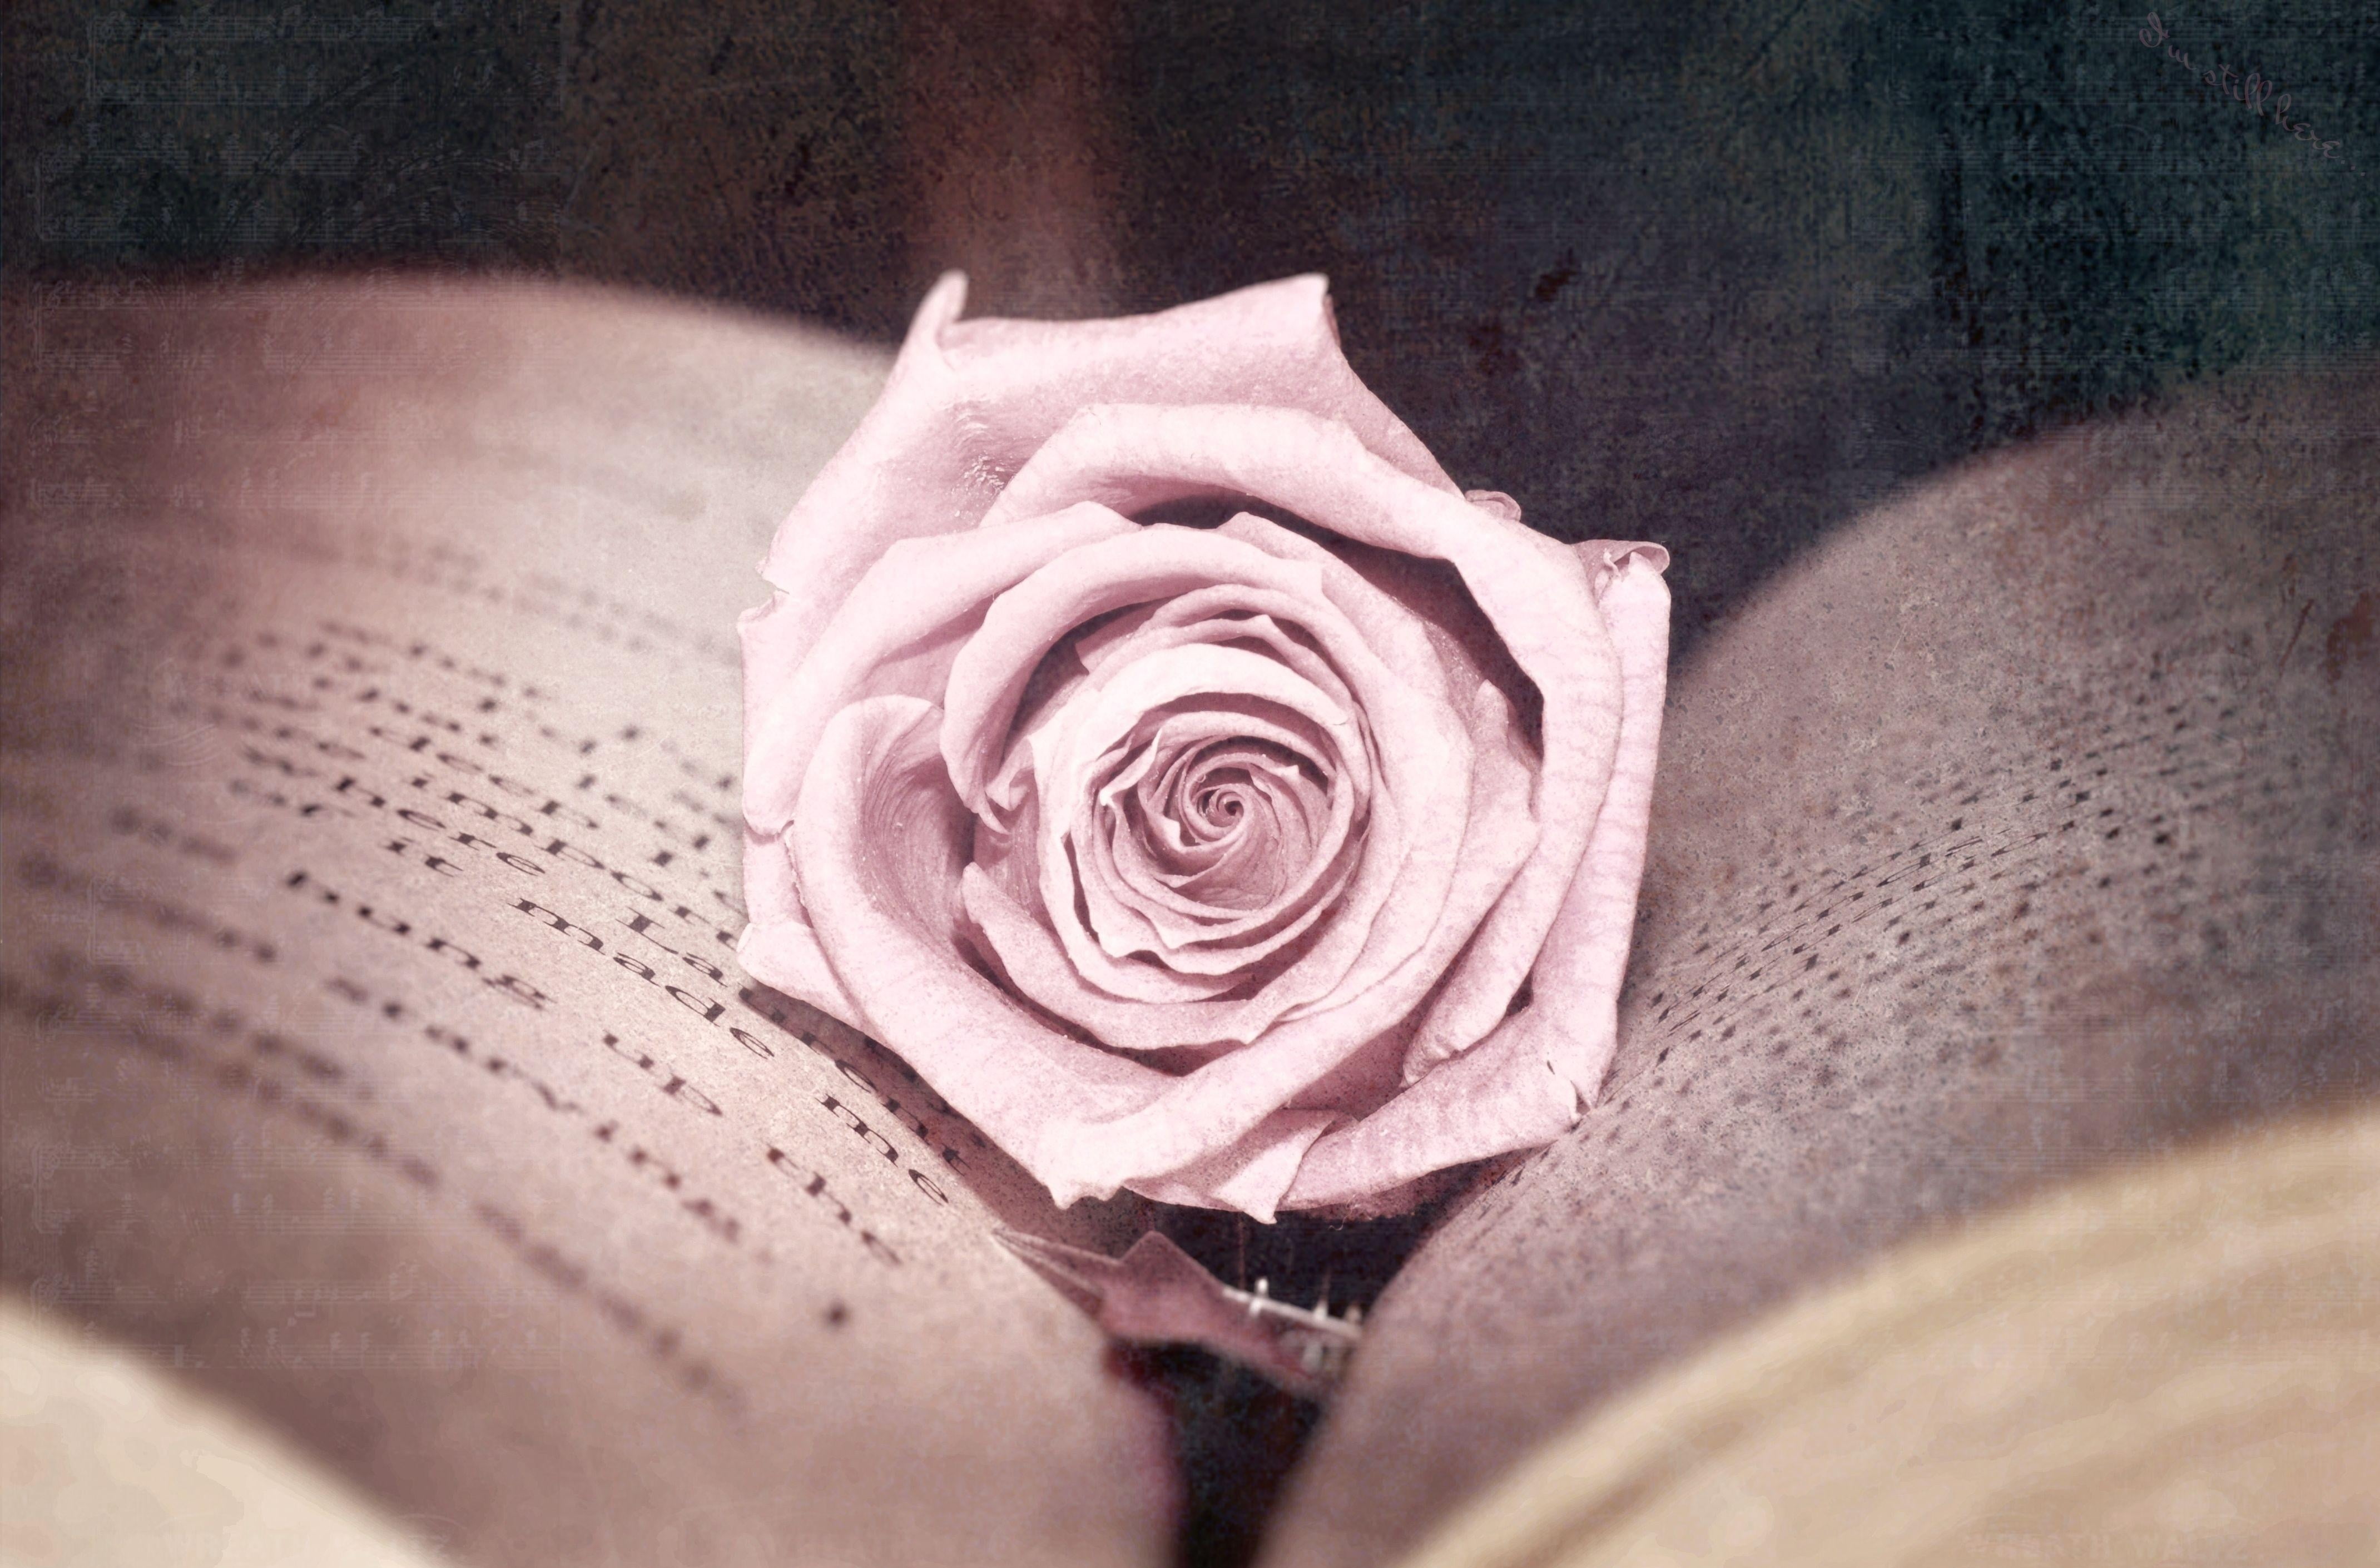 pink rose on book page